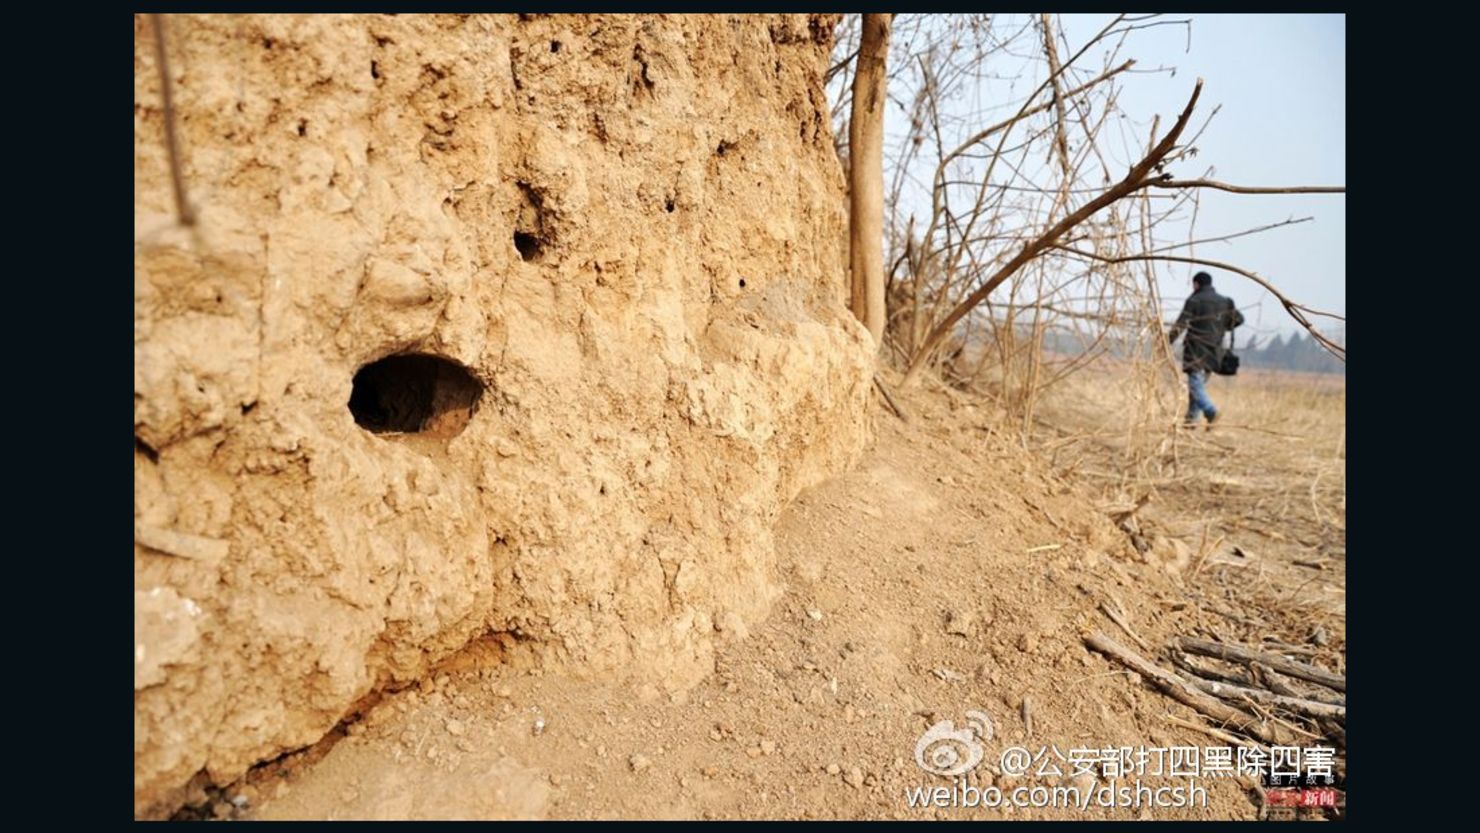 The Chinese Ministry of Public Security posted this photo of one of the raided tombs.